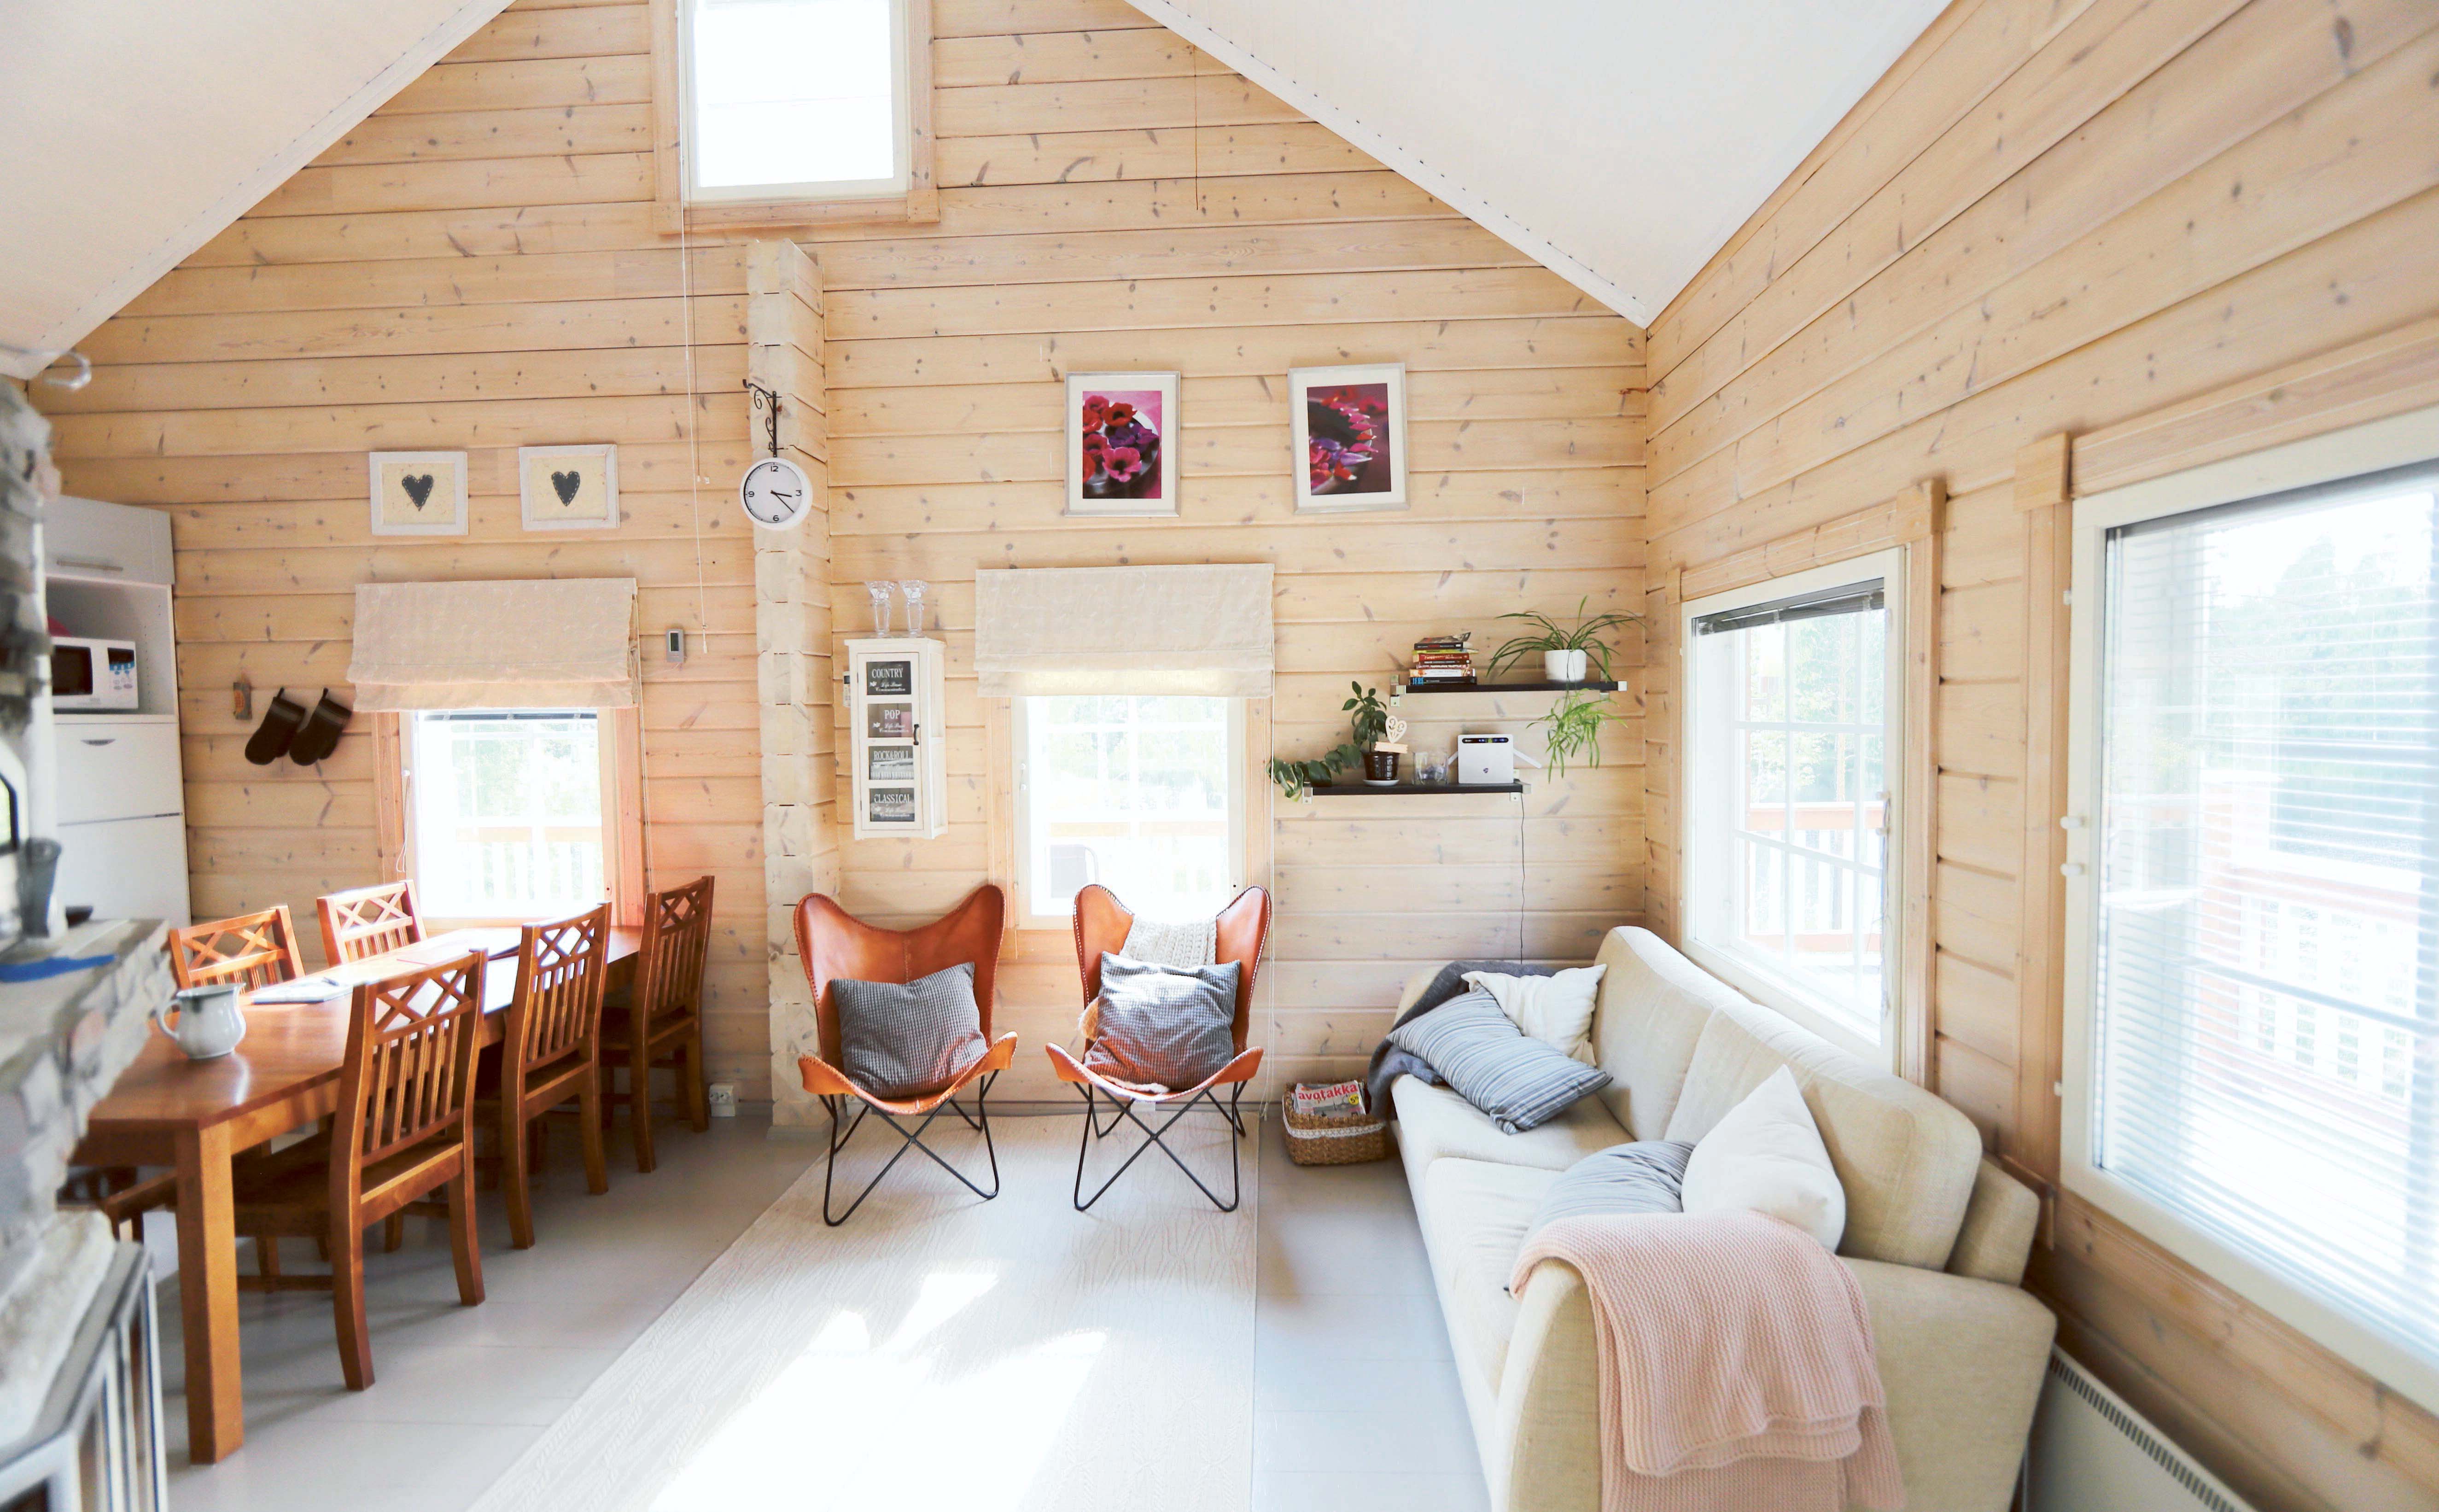 the interiors of a traditional well equip summer cottage in Finland